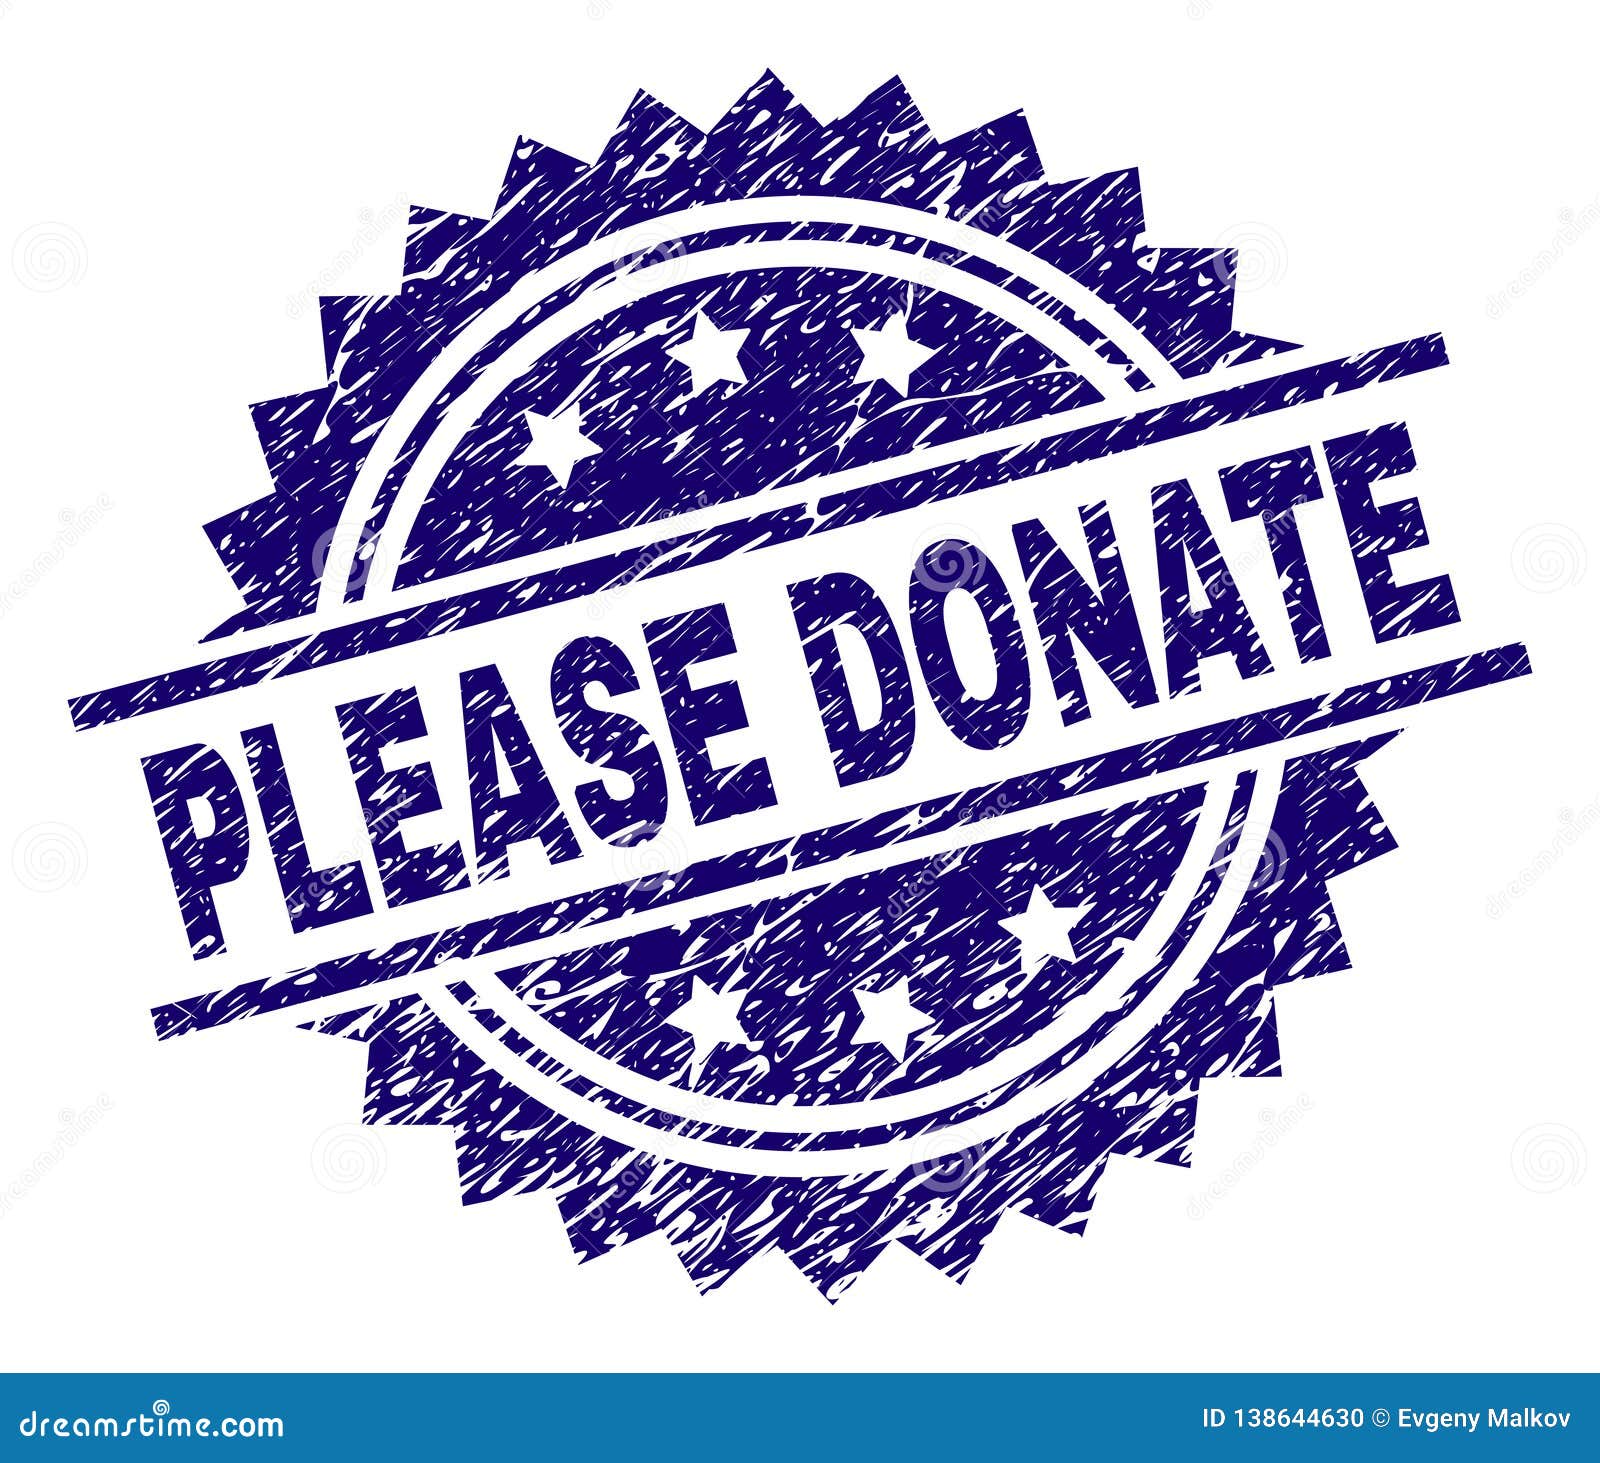 Please donate rubber stamp Royalty Free Vector Image